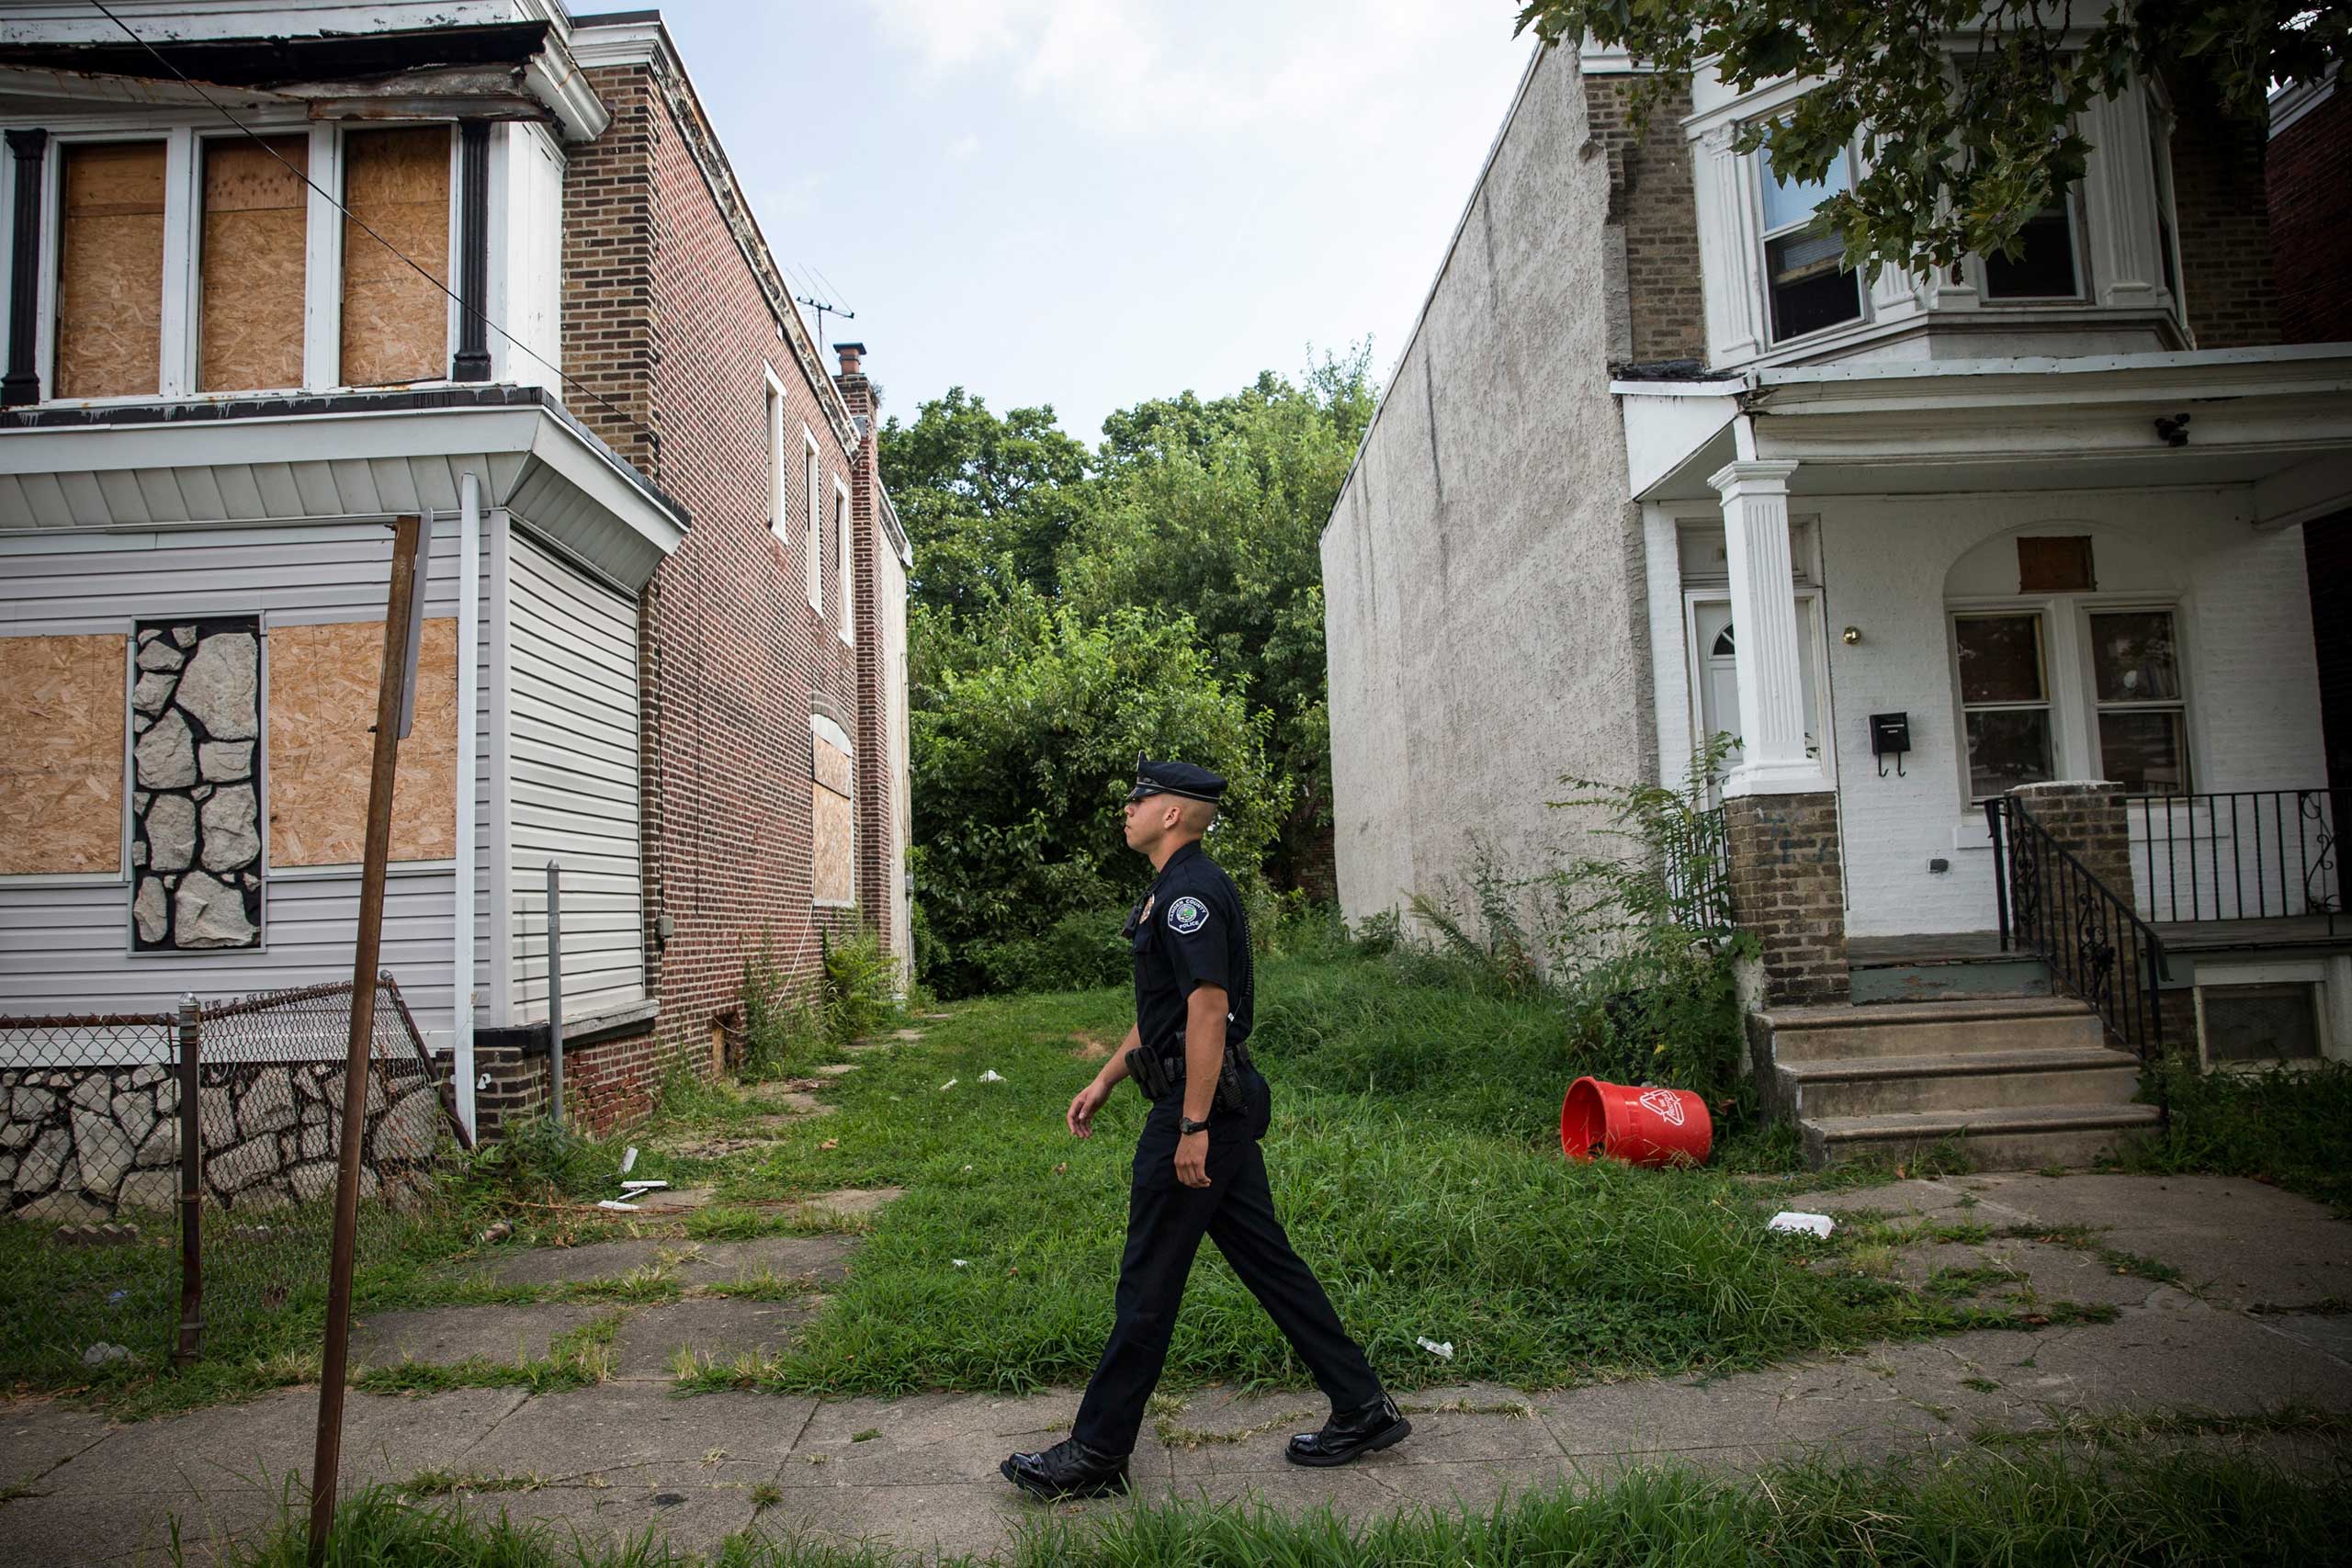 Officer Adam Fulmore, of the Camden County Police Department, goes on a foot patrol in the Parkside neighborhood of Camden, N.J. on Aug. 22, 2013.